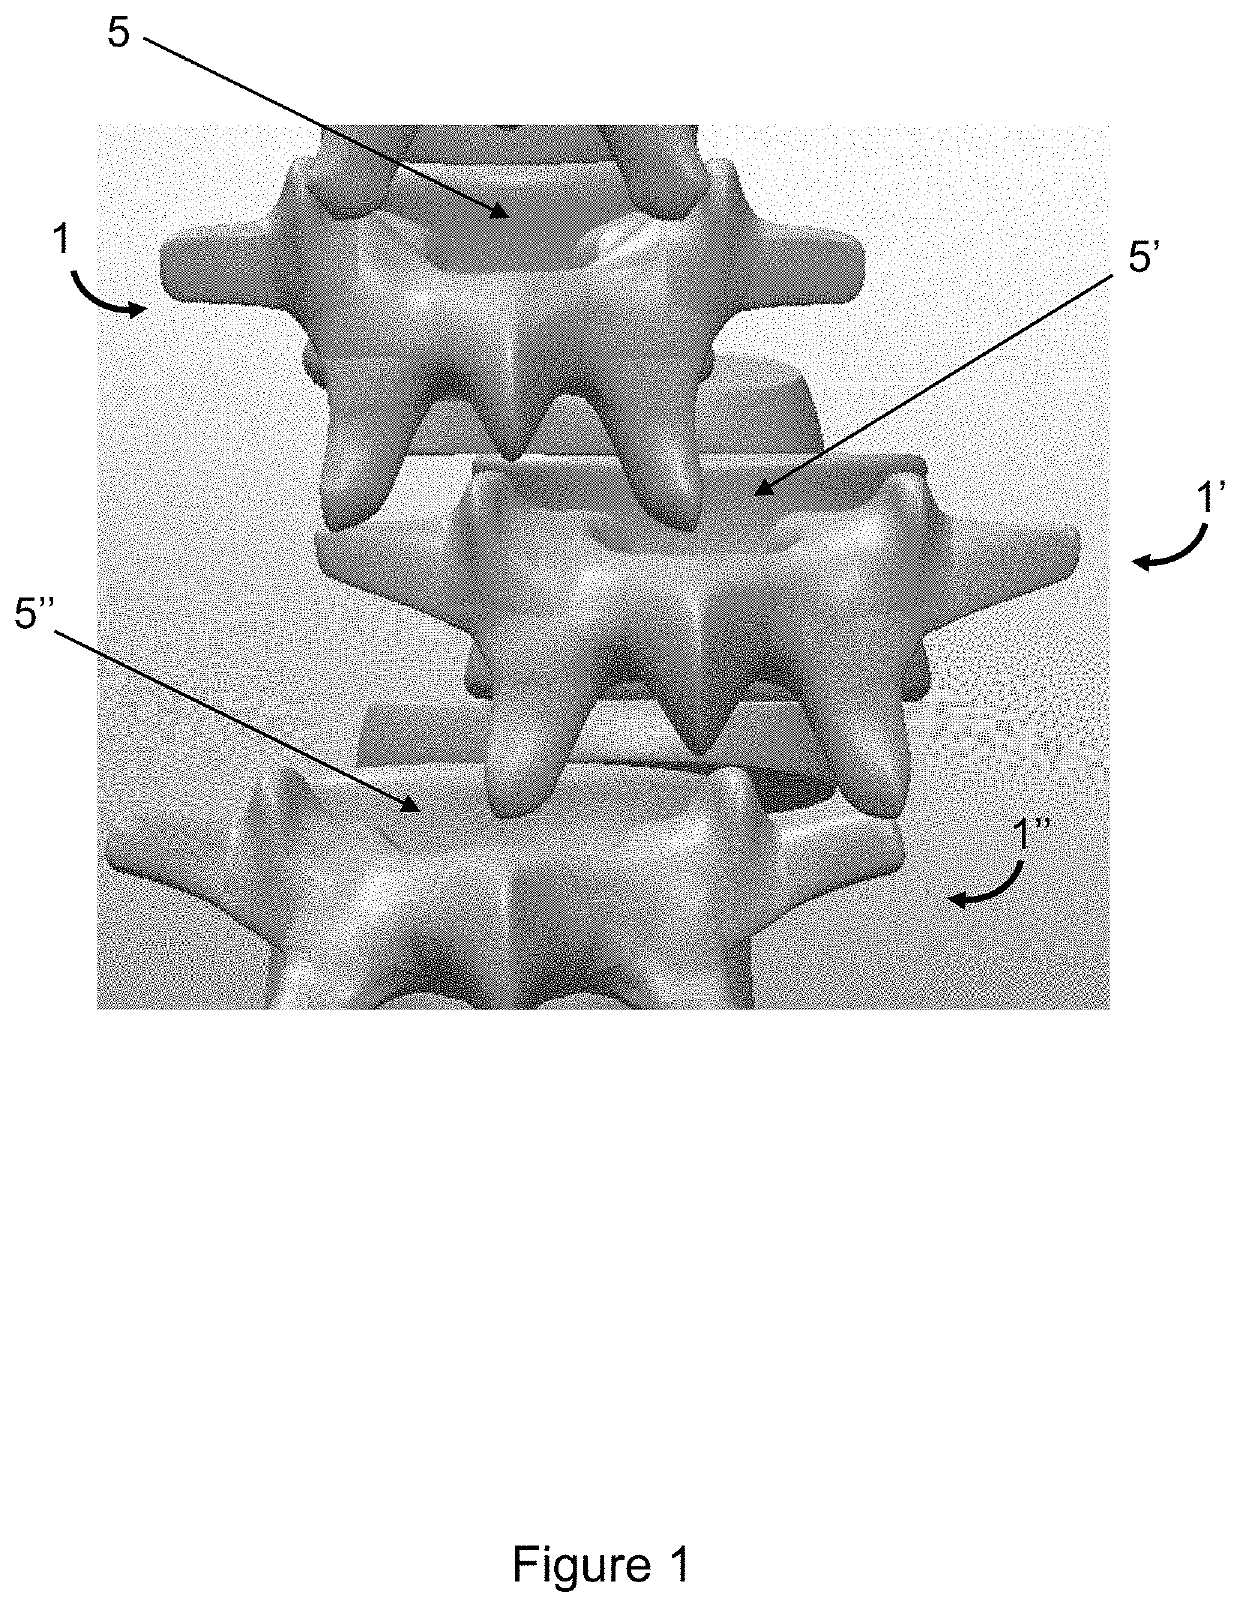 Device for Realignment, Stabilization, and Prevention of Progression of Abnormal Spine Curvature